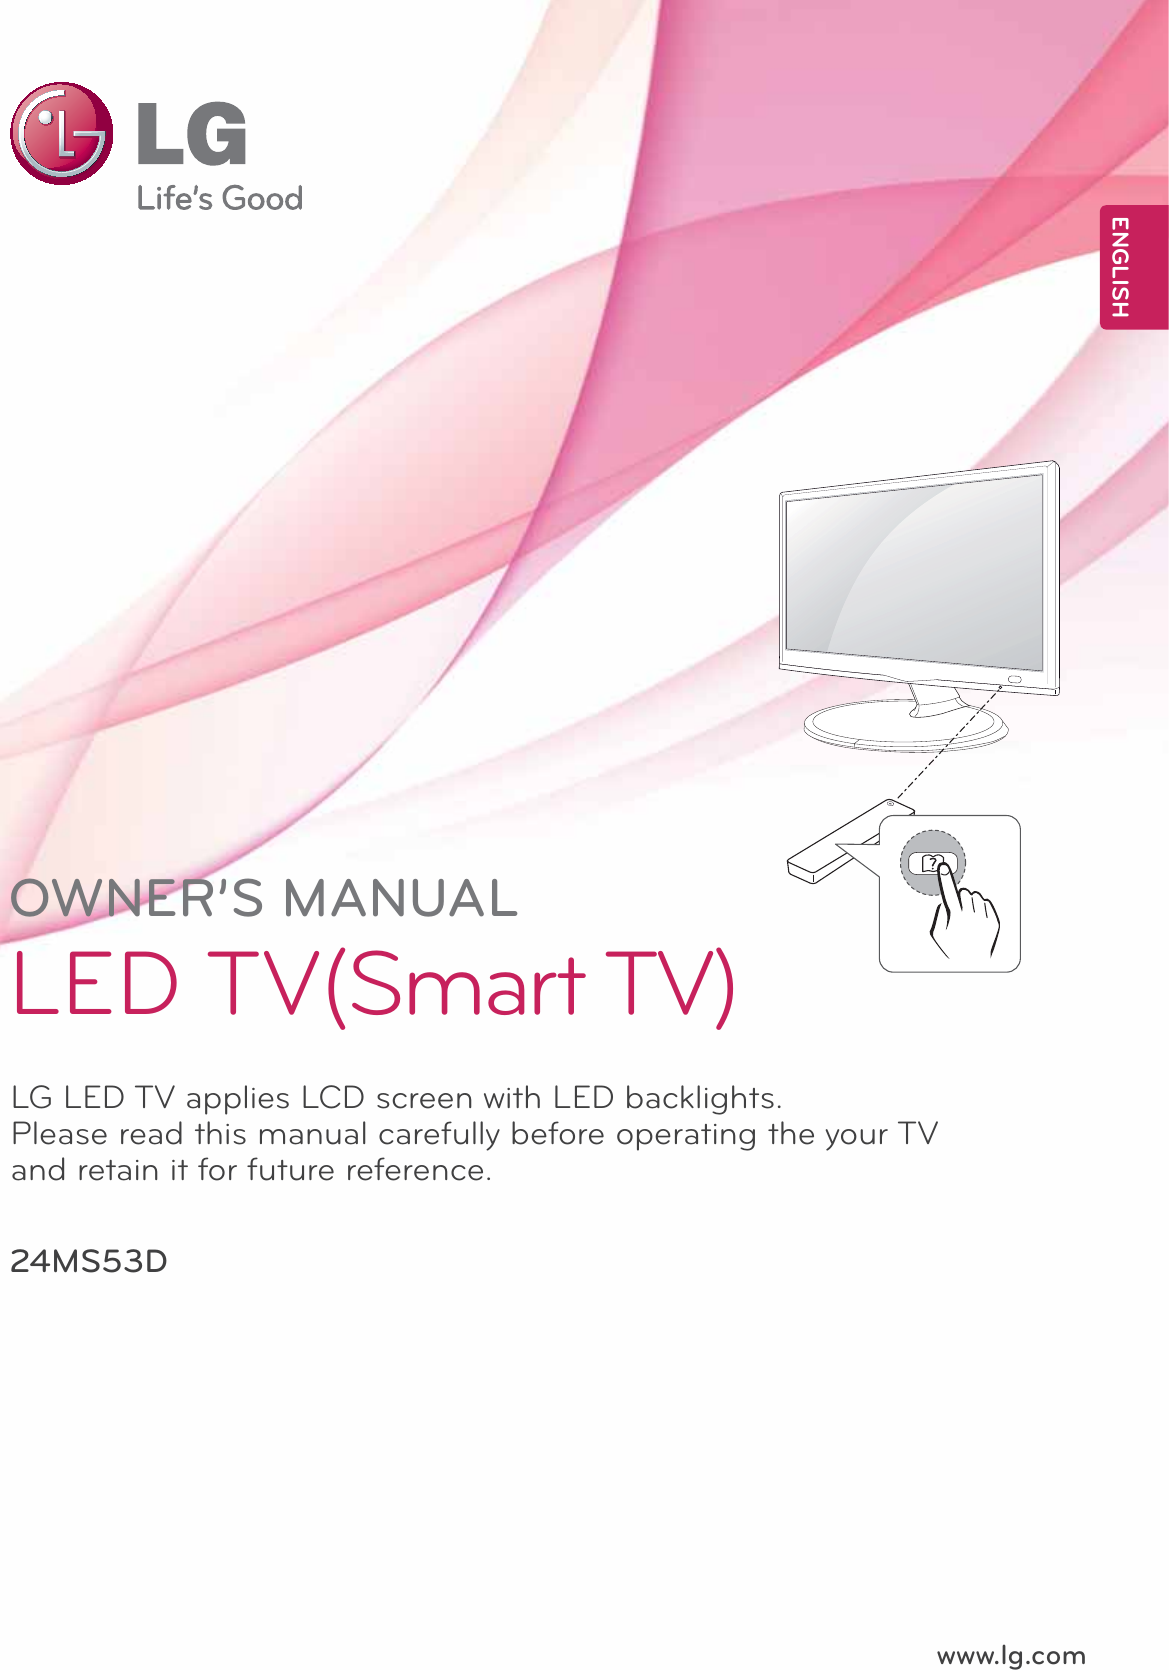 www.lg.comOWNER’S MANUALLED TV(Smart TV) 24MS53DLG LED TV applies LCD screen with LED backlights.Please read this manual carefully before operating the your TV and retain it for future reference.ENGLISH